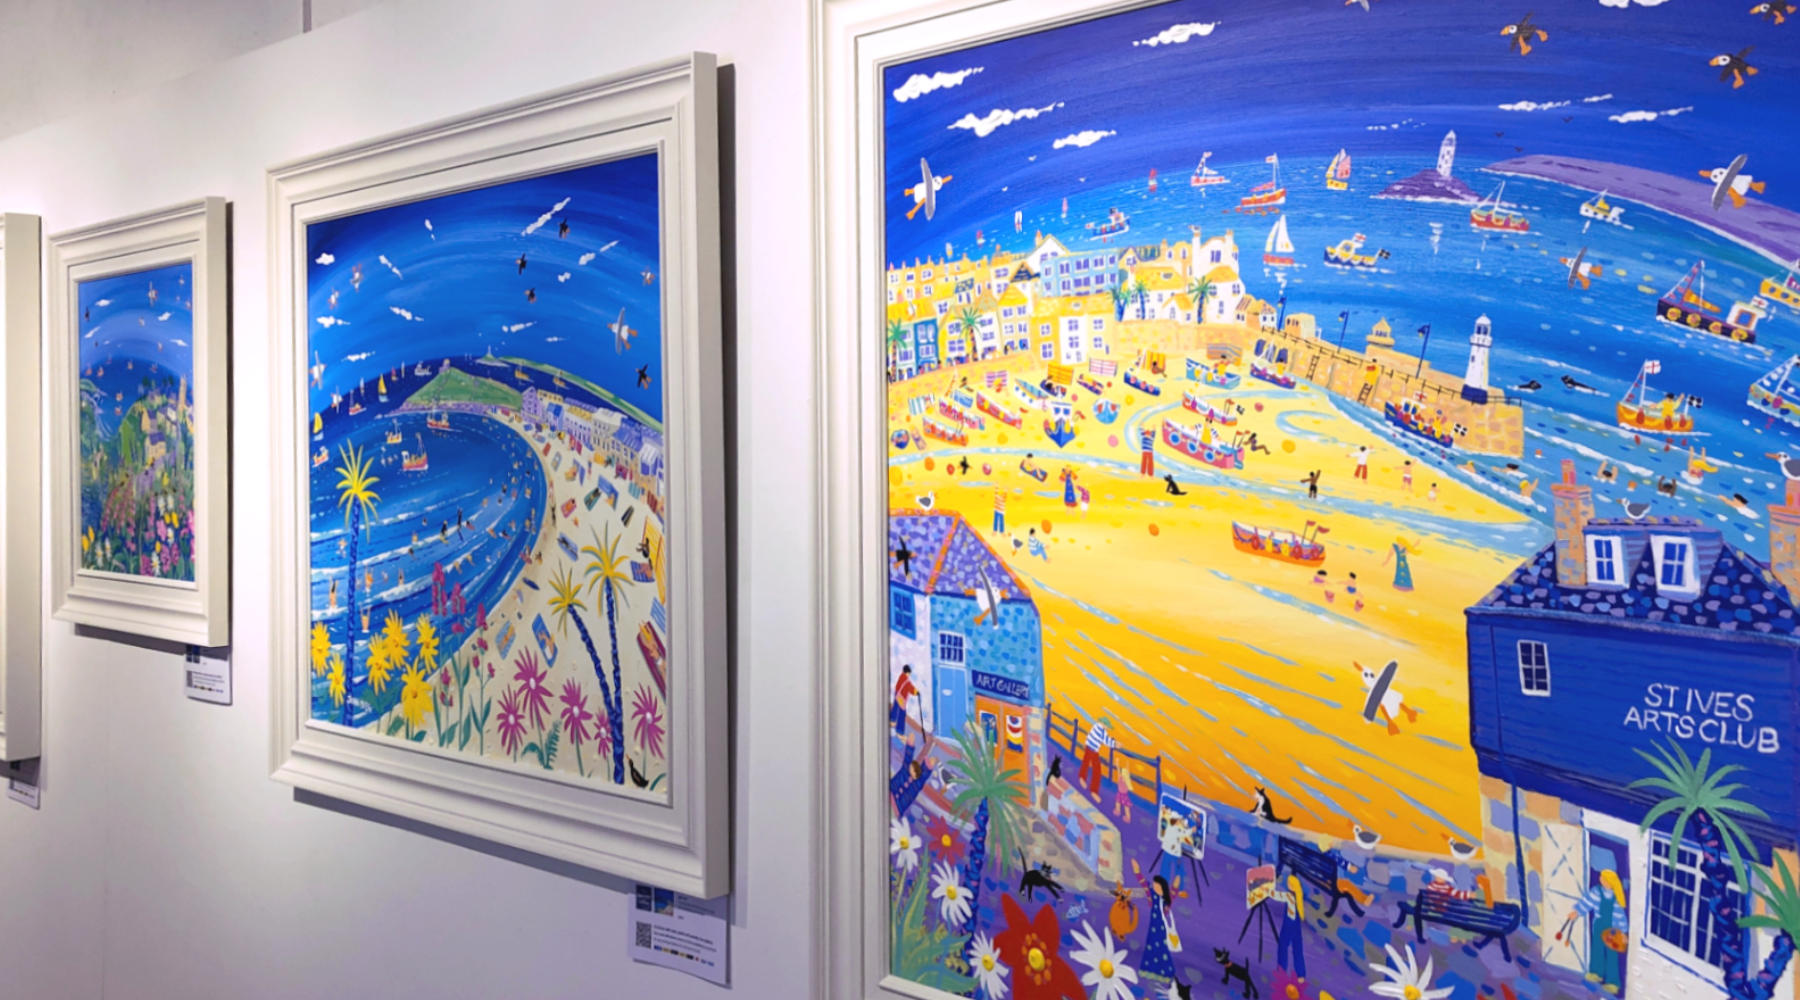 Original paintings by John Dyer displayed in a John Dyer Gallery exhibition in St Ives in Cornwall that are available to purchase online